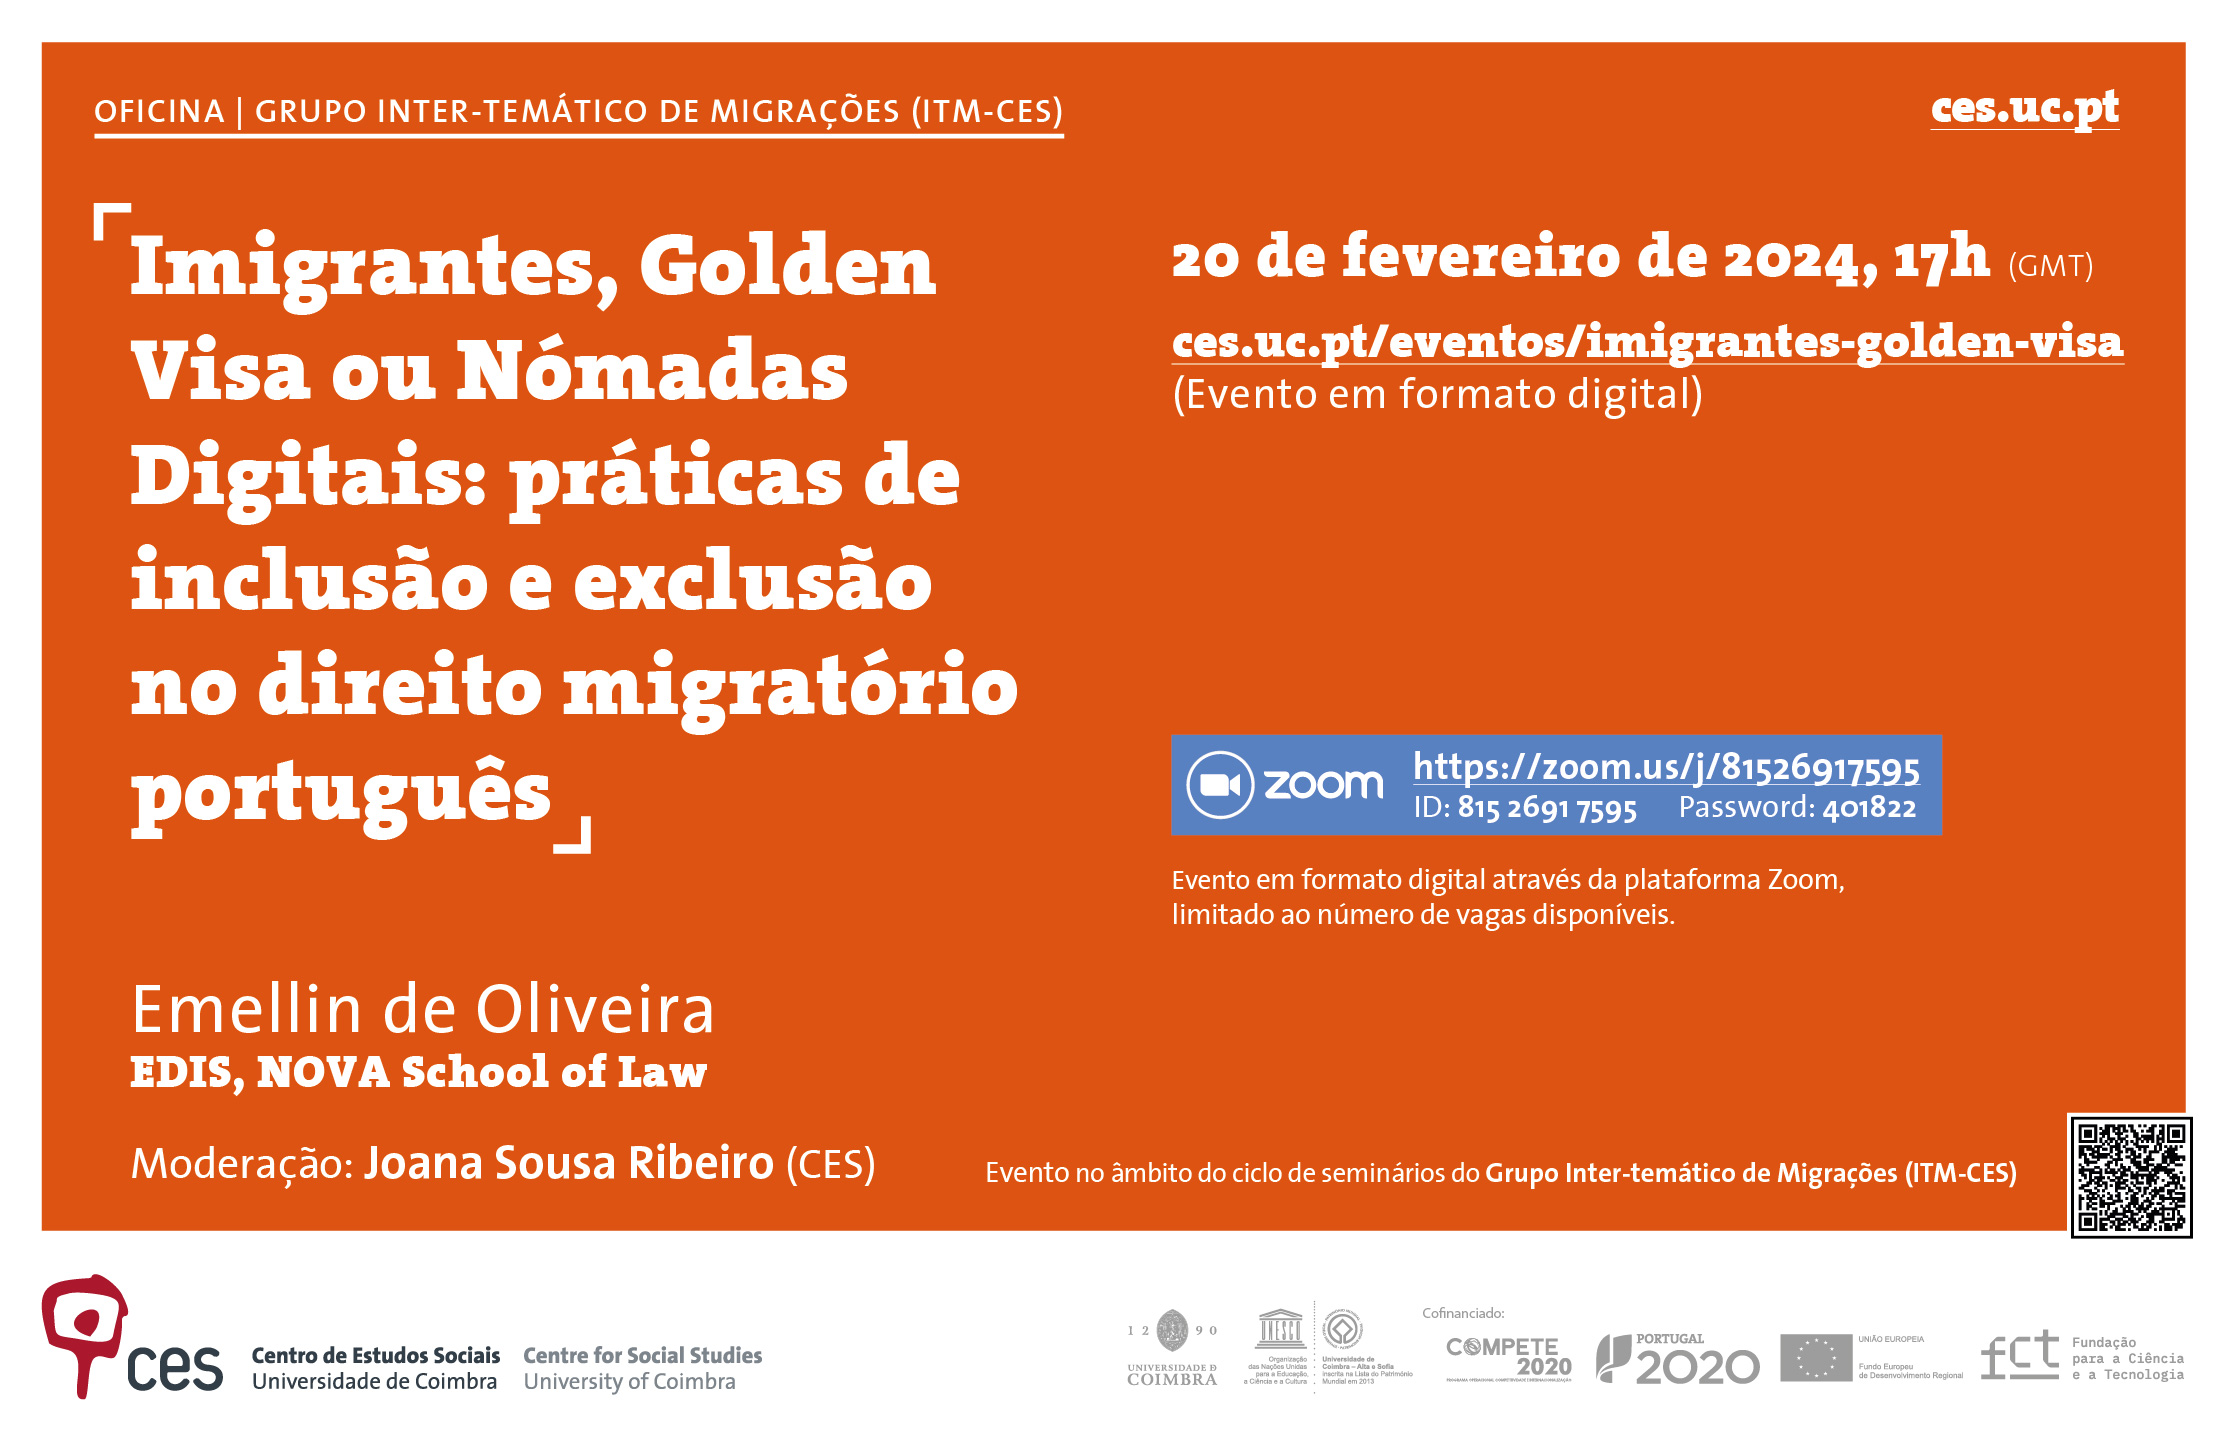 Immigrants, Golden Visa or Digital Nomads: practises of inclusion and exclusion in Portuguese migration law <span id="edit_44501"><script>$(function() { $('#edit_44501').load( "/myces/user/editobj.php?tipo=evento&id=44501" ); });</script></span>